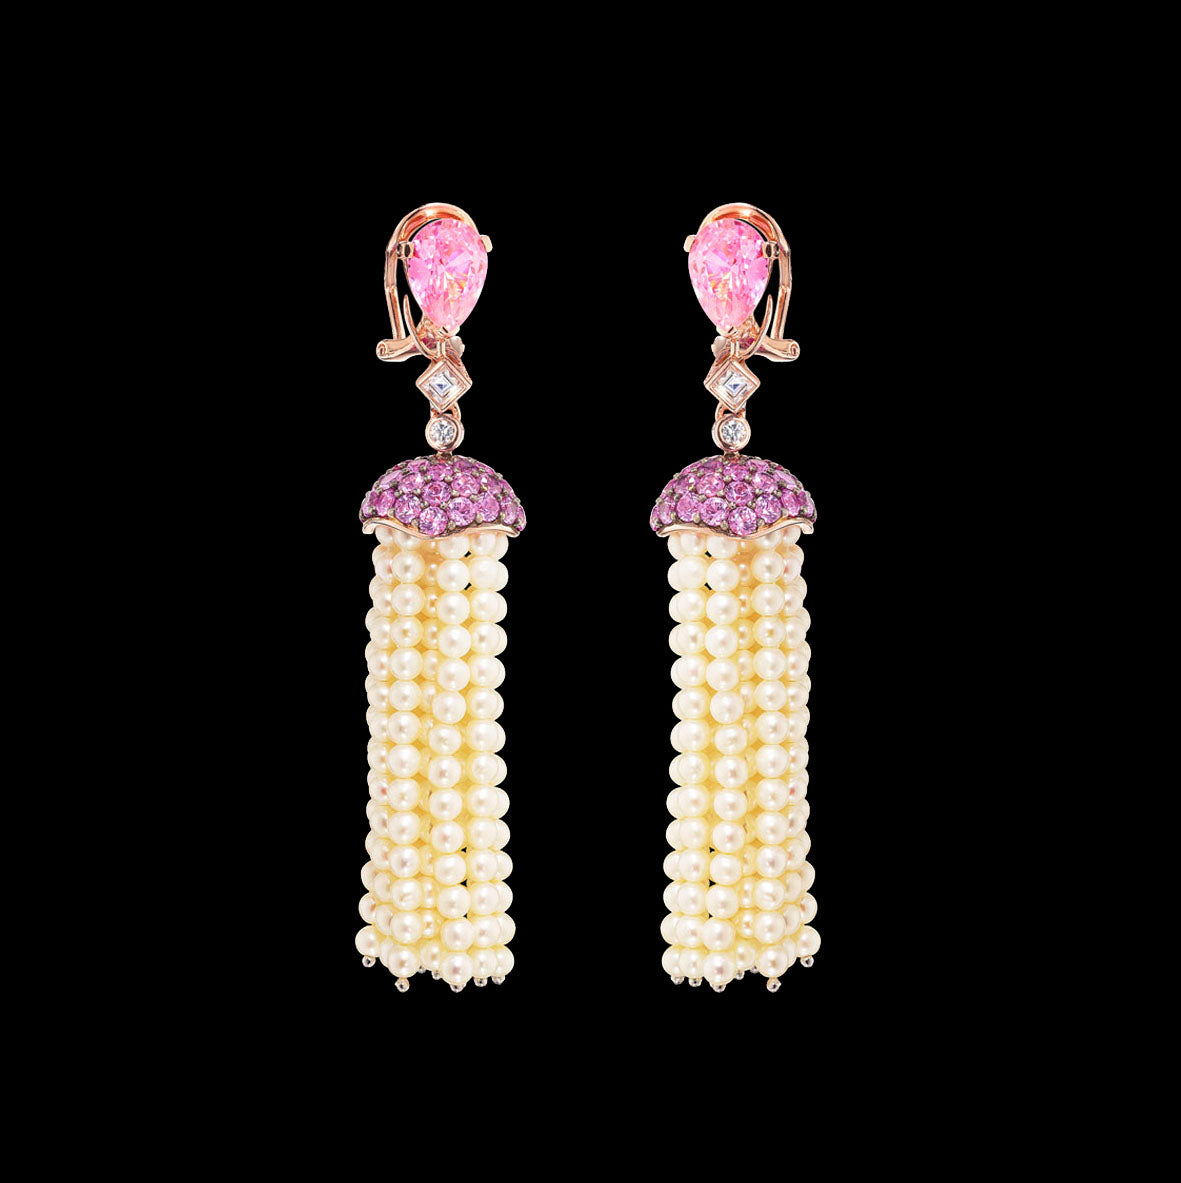 Rose Sapphire Pearl Tassel Earrings, Earring, Anabela Chan Joaillerie - Fine jewelry with laboratory grown and created gemstones hand-crafted in the United Kingdom. Anabela Chan Joaillerie is the first fine jewellery brand in the world to champion laboratory-grown and created gemstones with high jewellery design, artisanal craftsmanship and a focus on ethical and sustainable innovations.